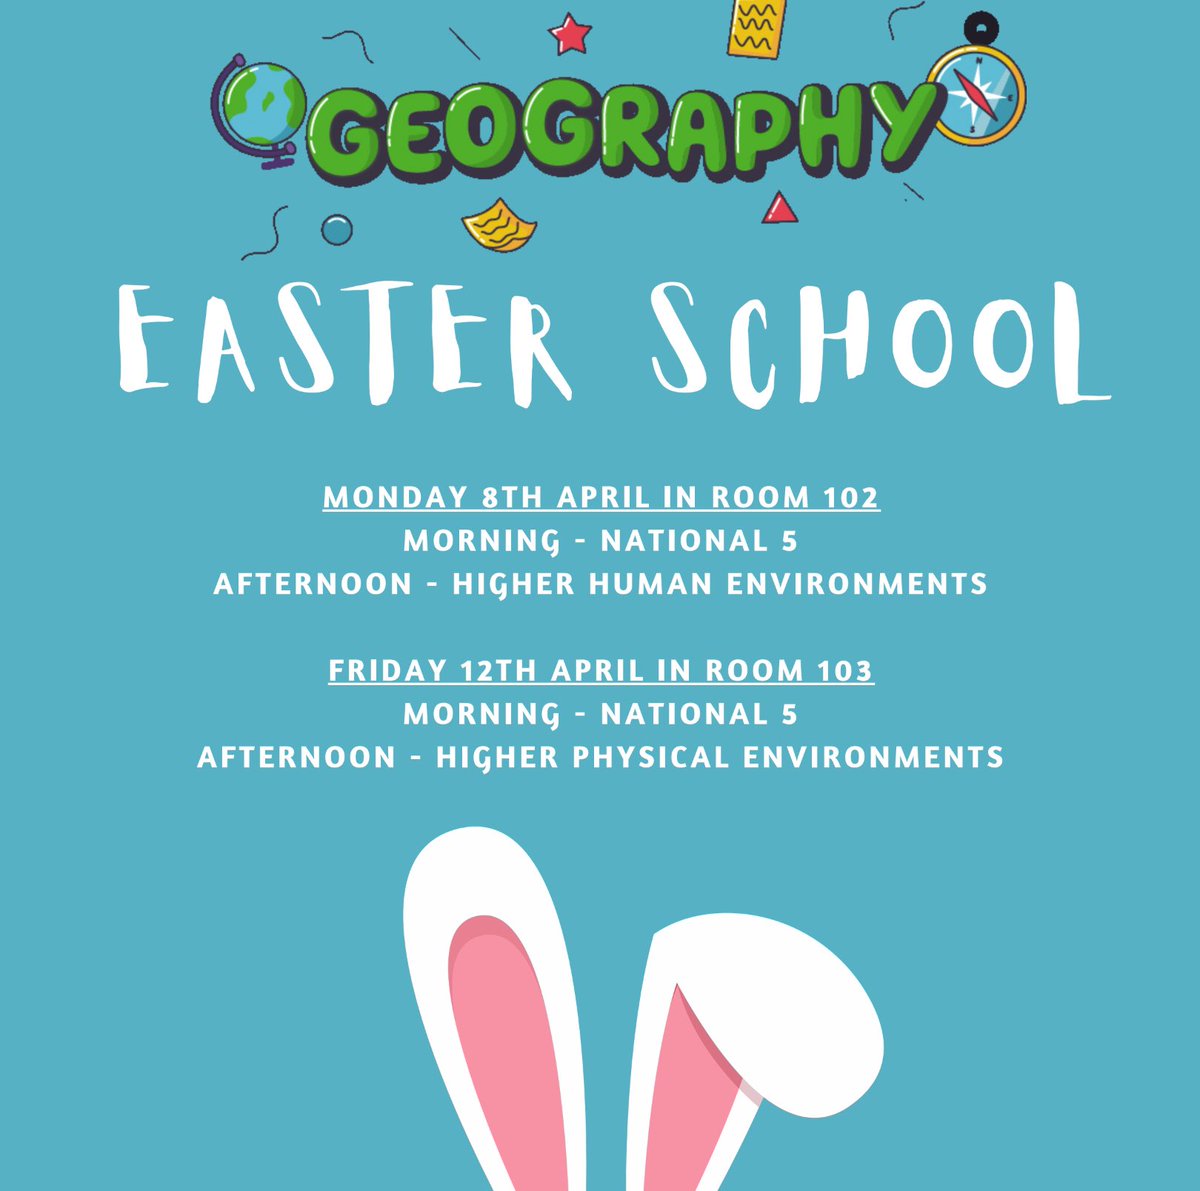 Come along to Easter School this week, Geographers 🌍 #RRS #Article29